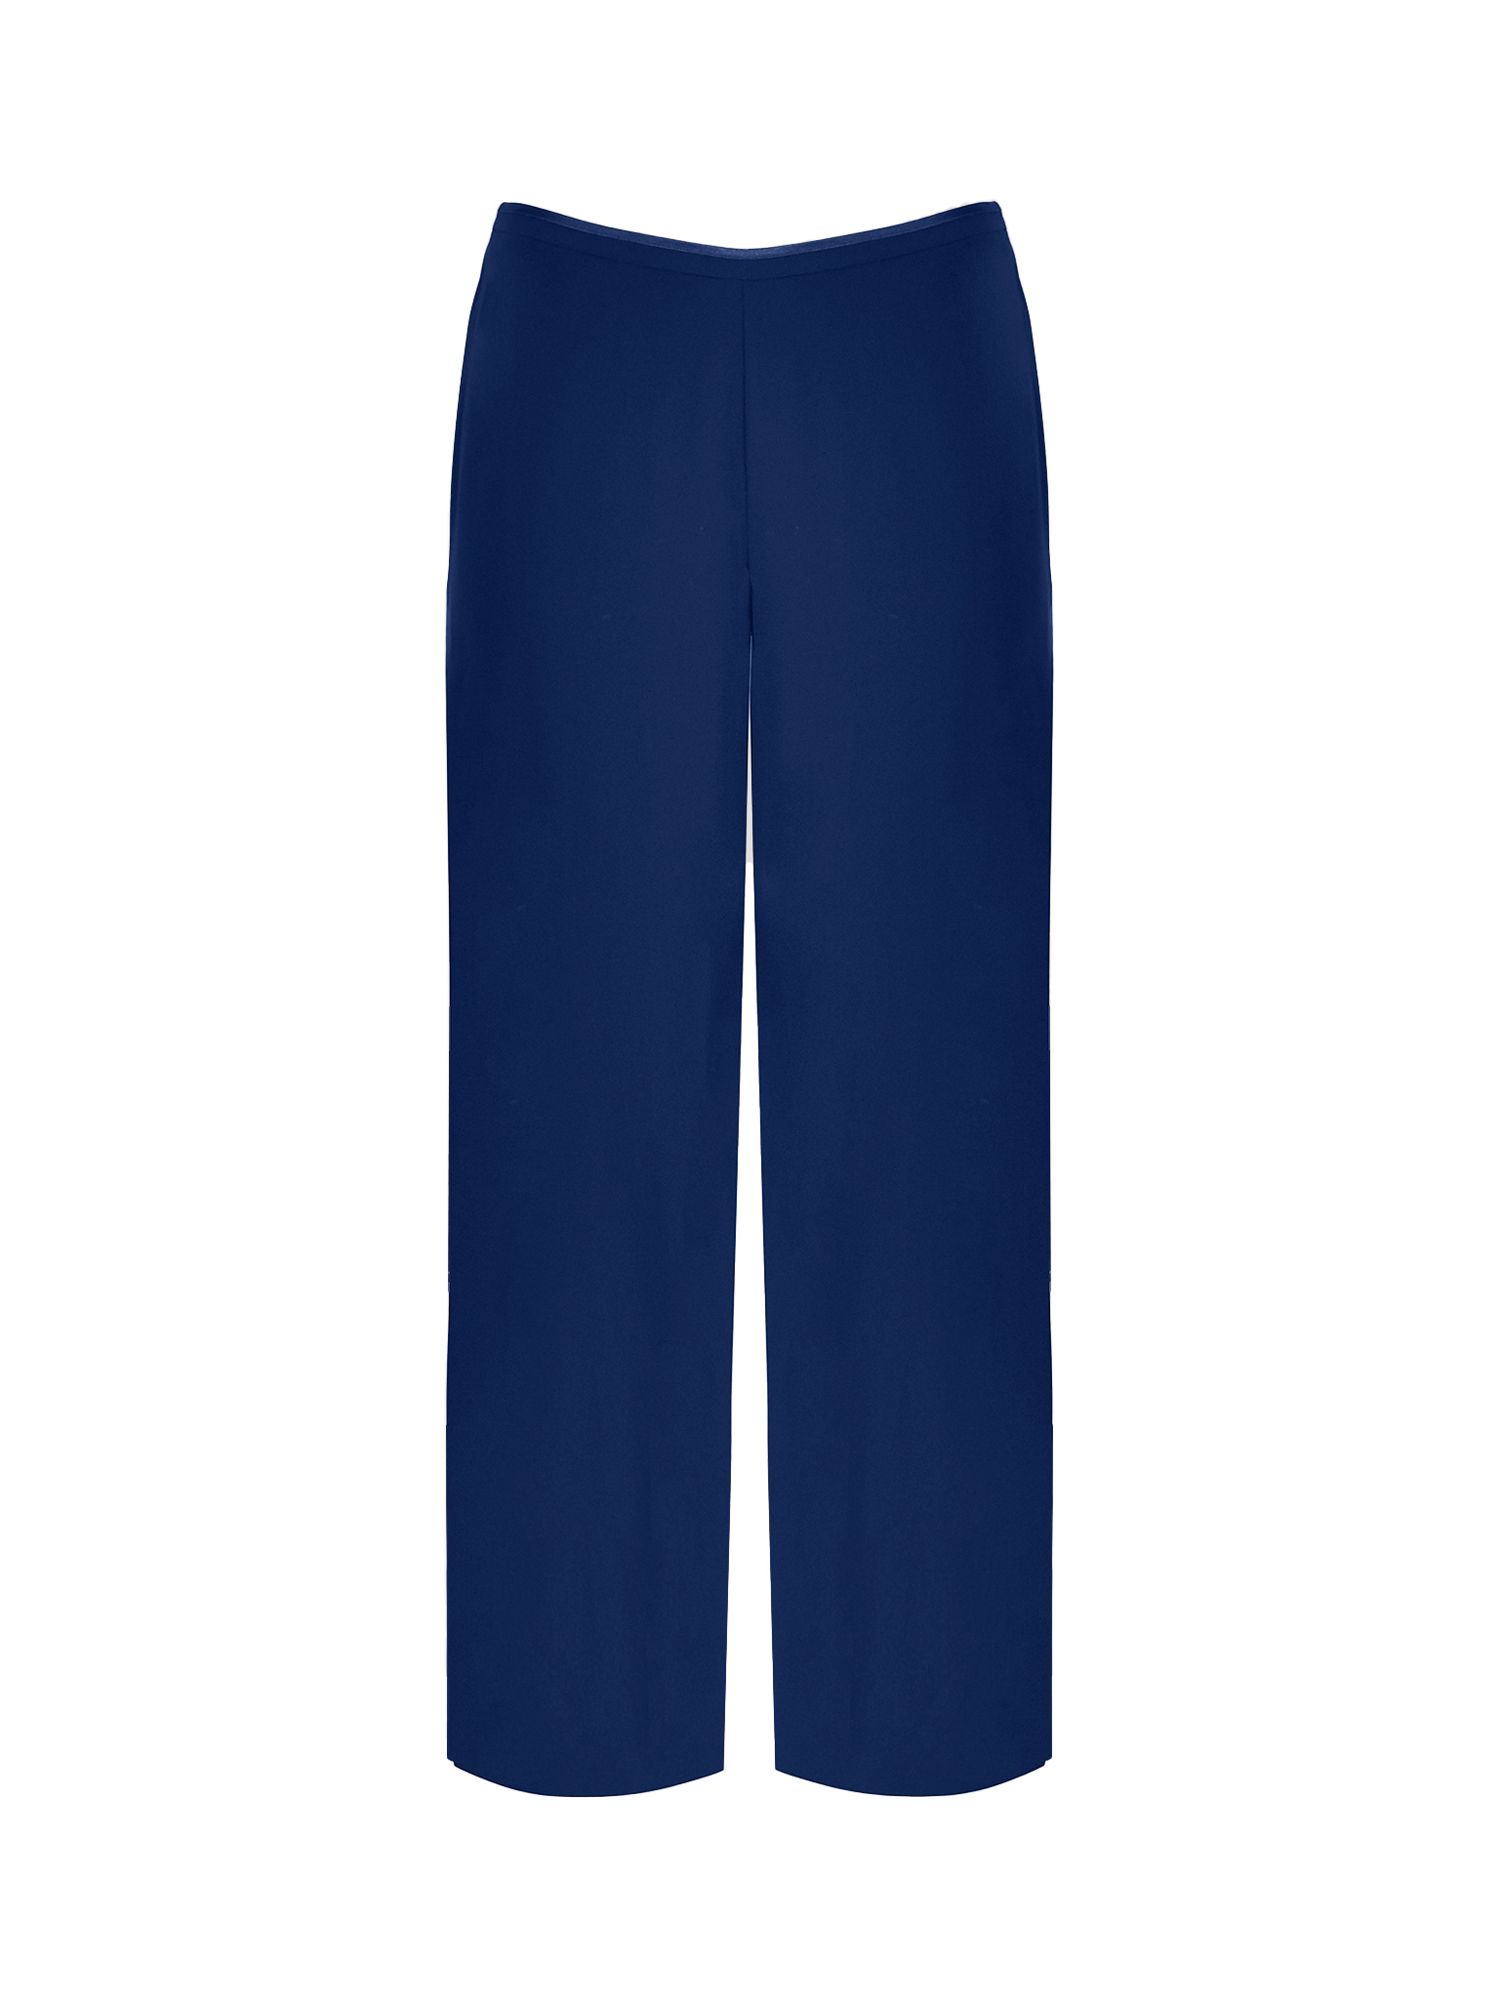 Live Unlimited Curve Navy Chiffon Lined Trouser, Blue at John Lewis &  Partners